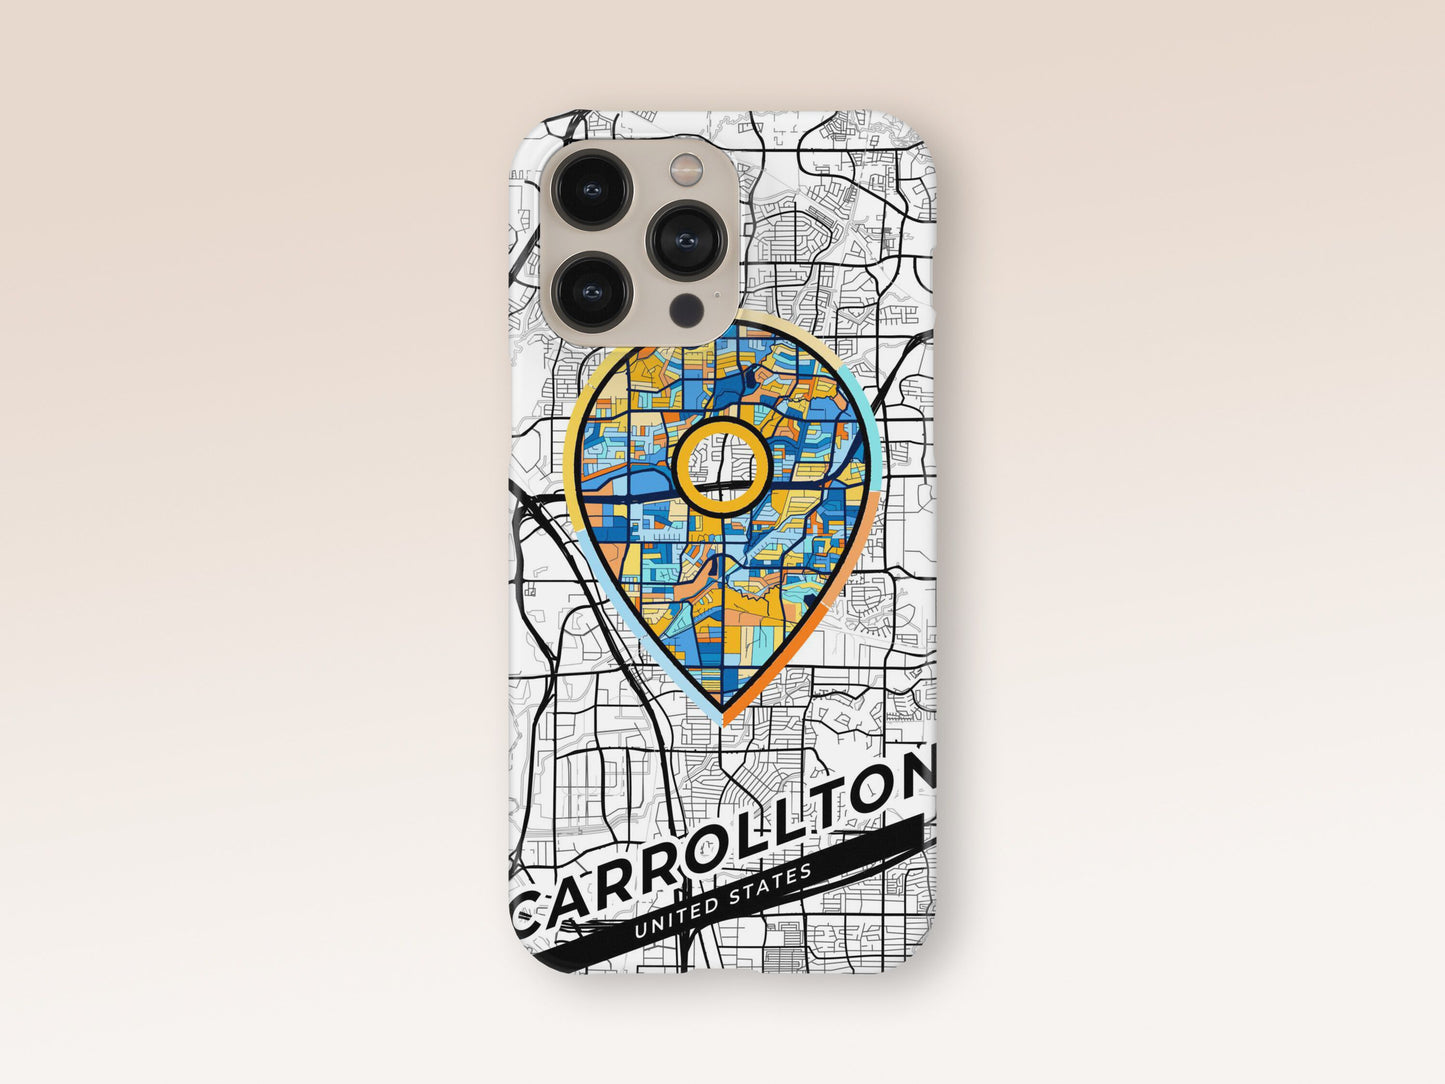 Carrollton Texas slim phone case with colorful icon. Birthday, wedding or housewarming gift. Couple match cases. 1